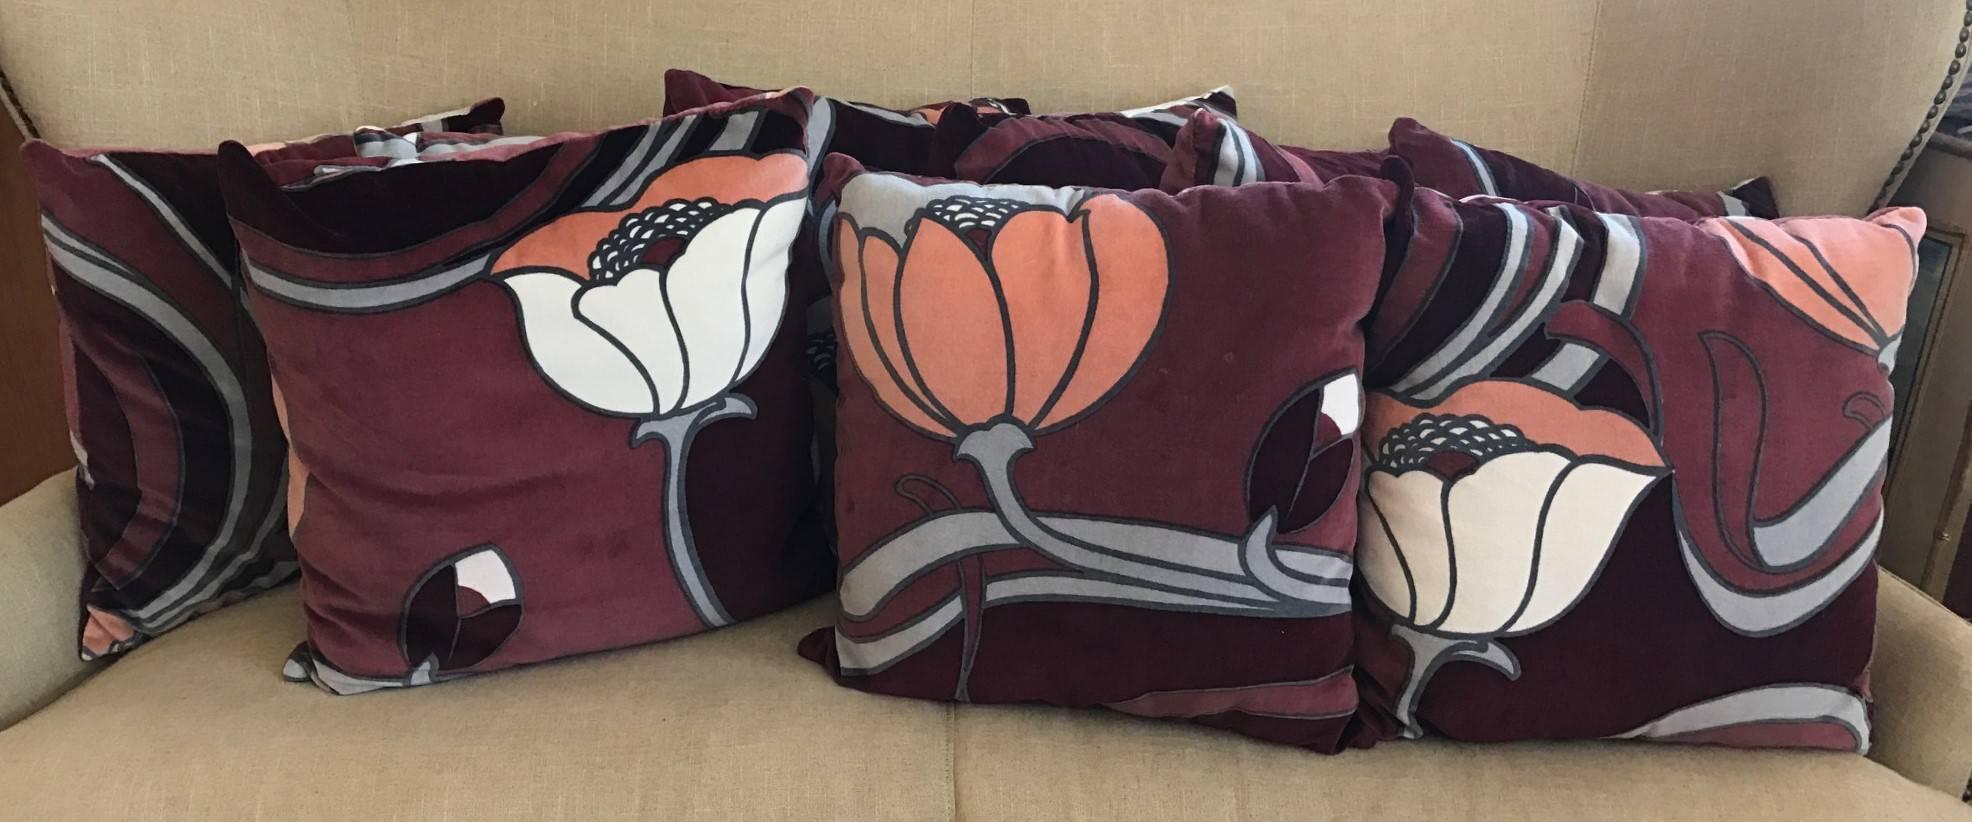 Authentic ultra groovy! Set of nine Mid-Century Modern velvet lotus flower pillows - great colors! Unique in excellent condition and fun...of the period.

Can buy one.

